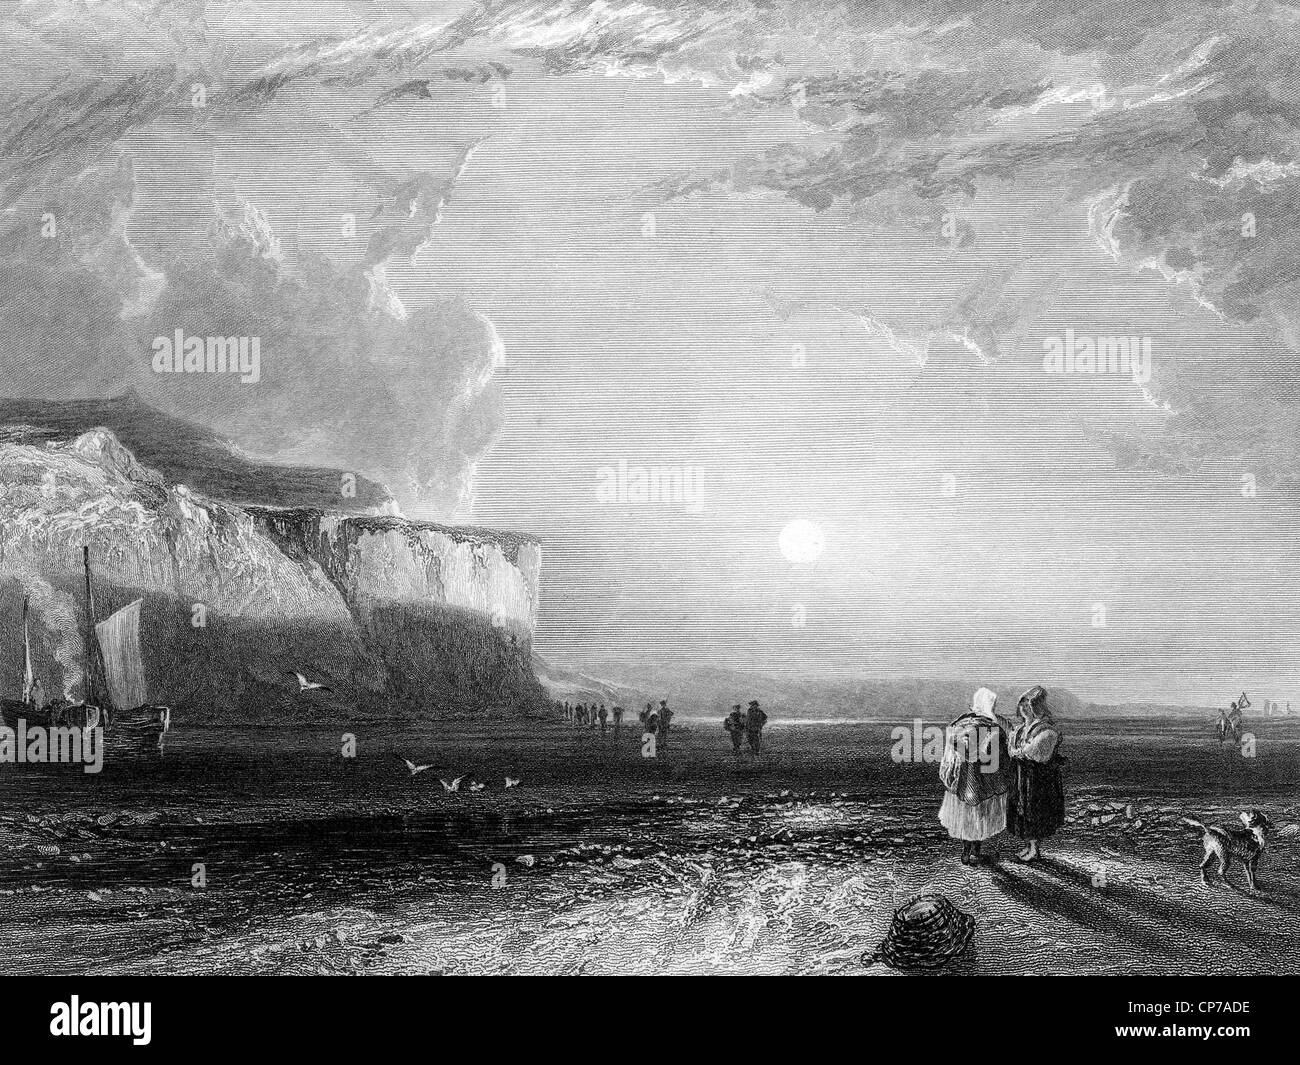 Engraving of Victorian beach scene, Cornwall, England. Engraved by William Miller in 1831. Stock Photo